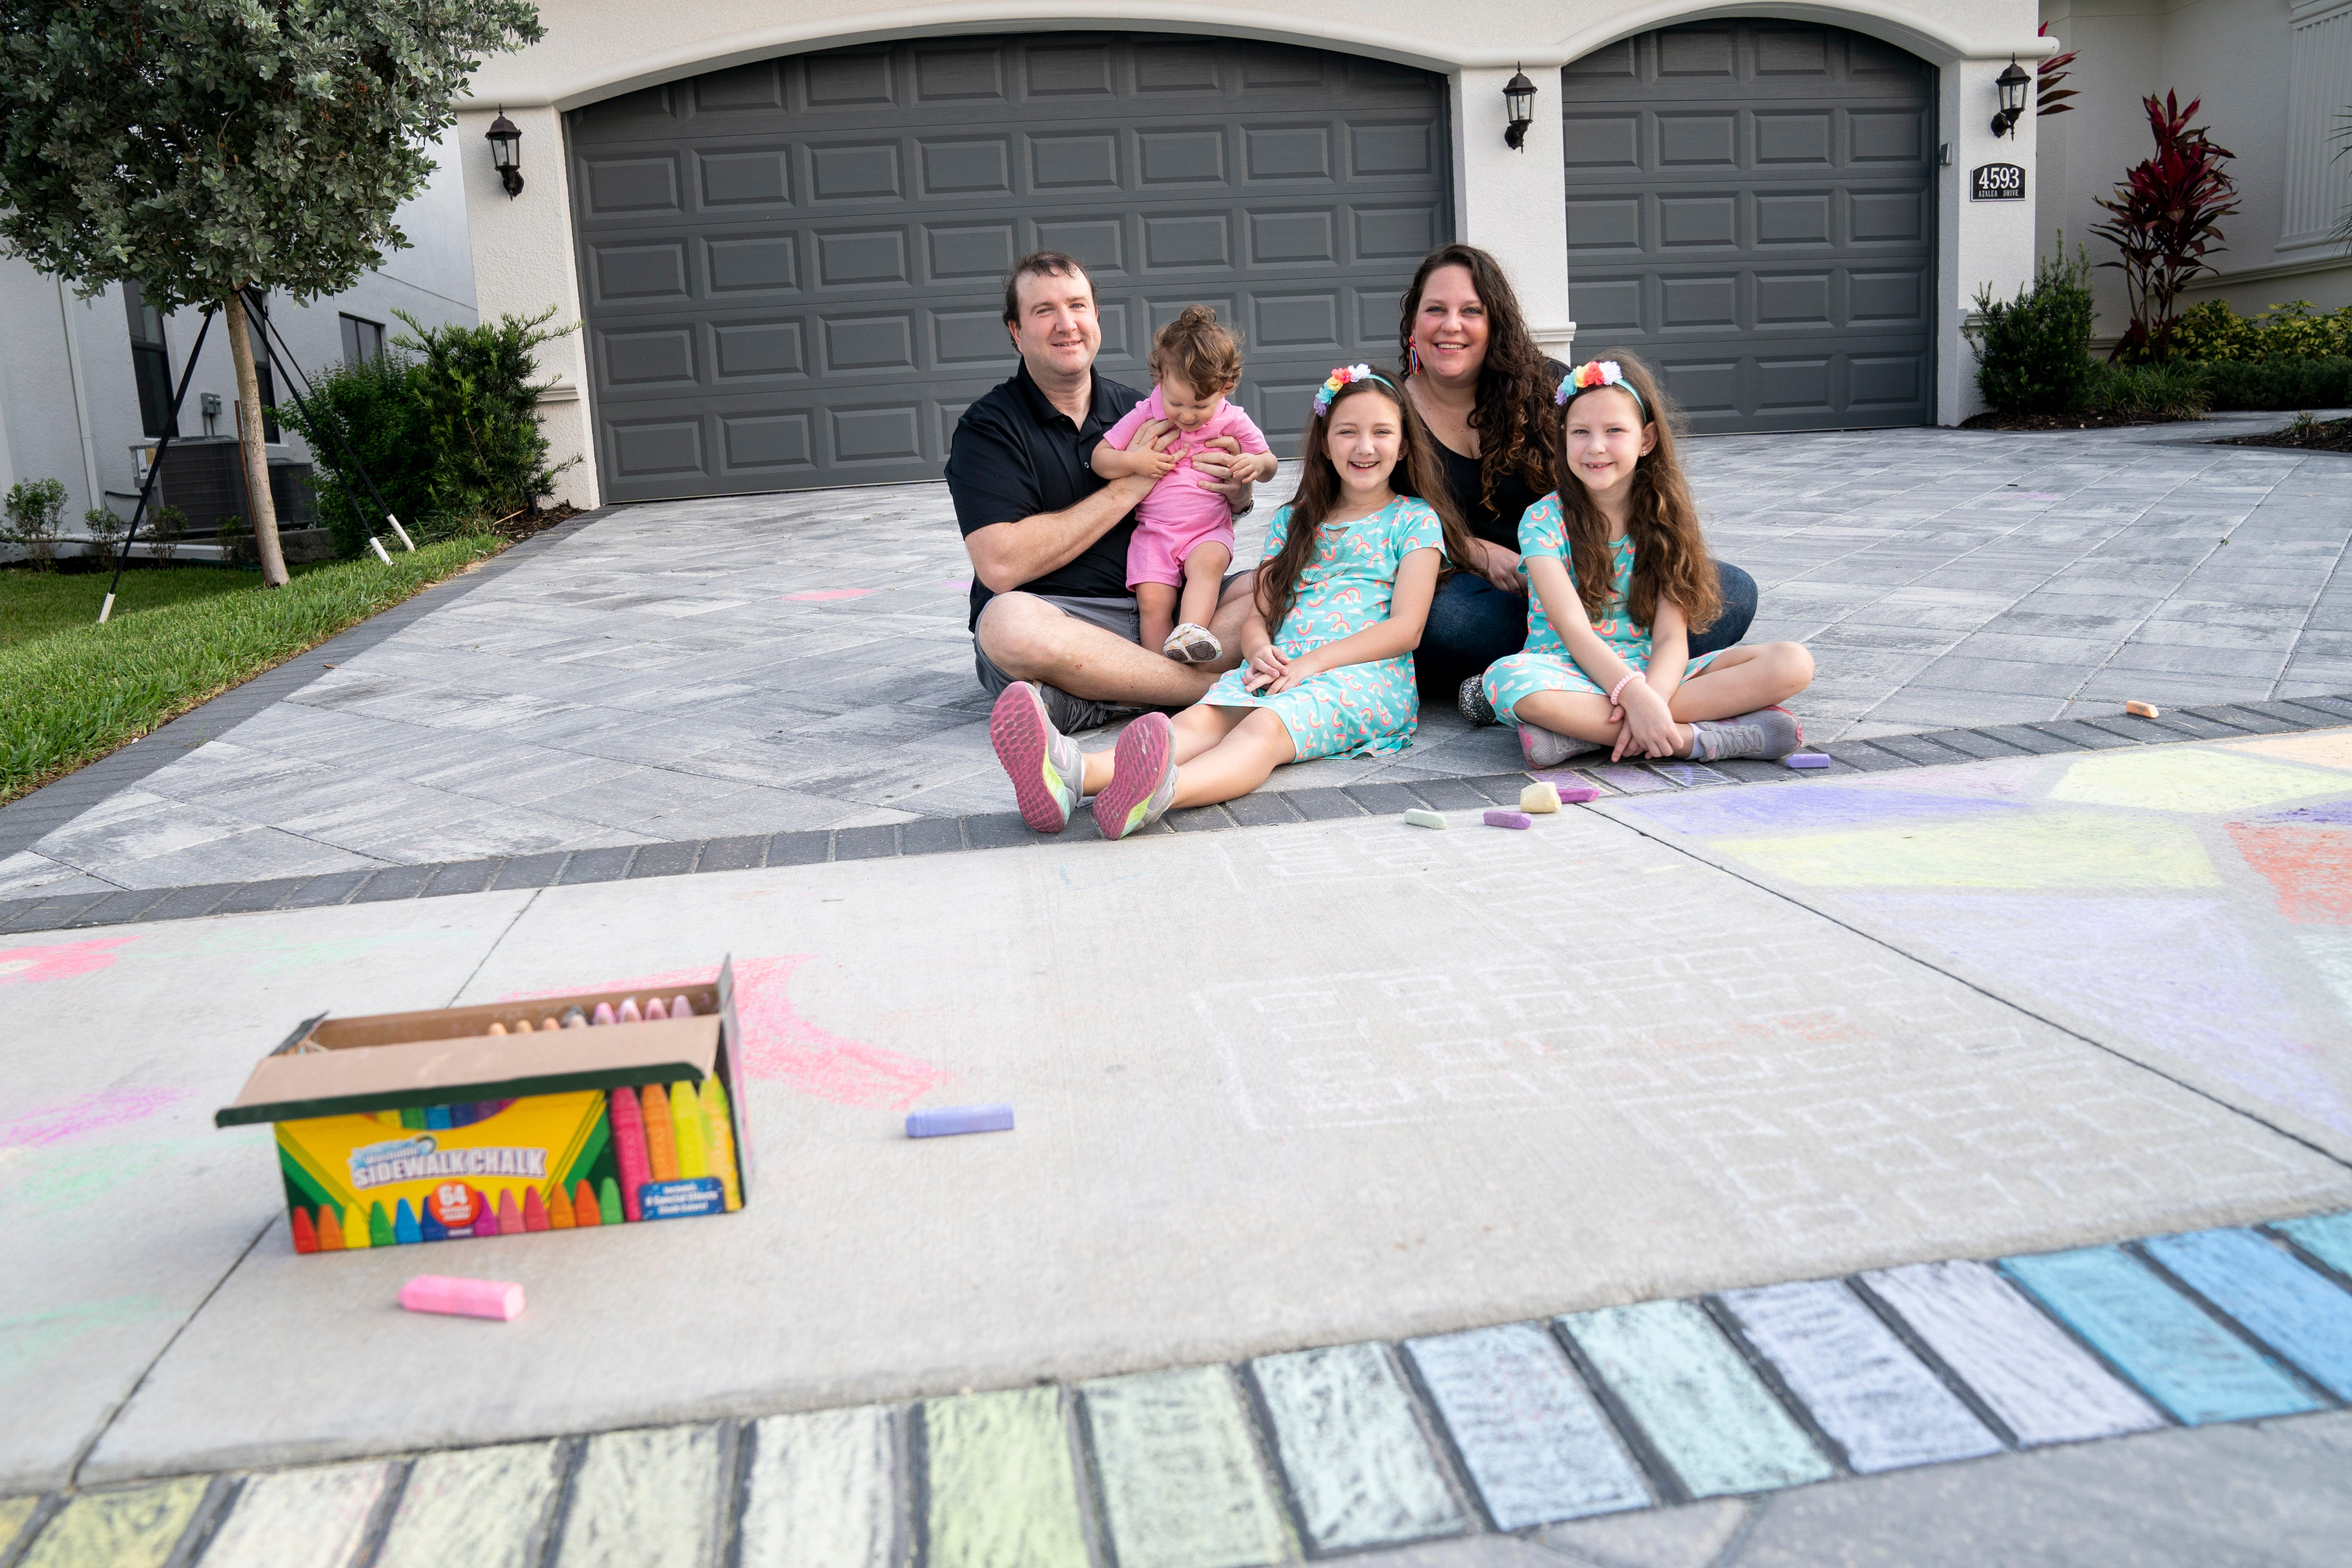 From left to right: Deric Long, Parker Long, 1, Delaney Long, 9, Ashley Long, and Brooklyn Long, 7, pose for a portrait at their home in North Naples on Friday, April 10, 2020. The Longs have been finding new activities to keep themselves busy, like coloring with chalk, doing arts and crafts and having family game nights, which has been Delaney's favorite part. "We've been spending a lot more time as a family, which is awesome," Deric Long said.